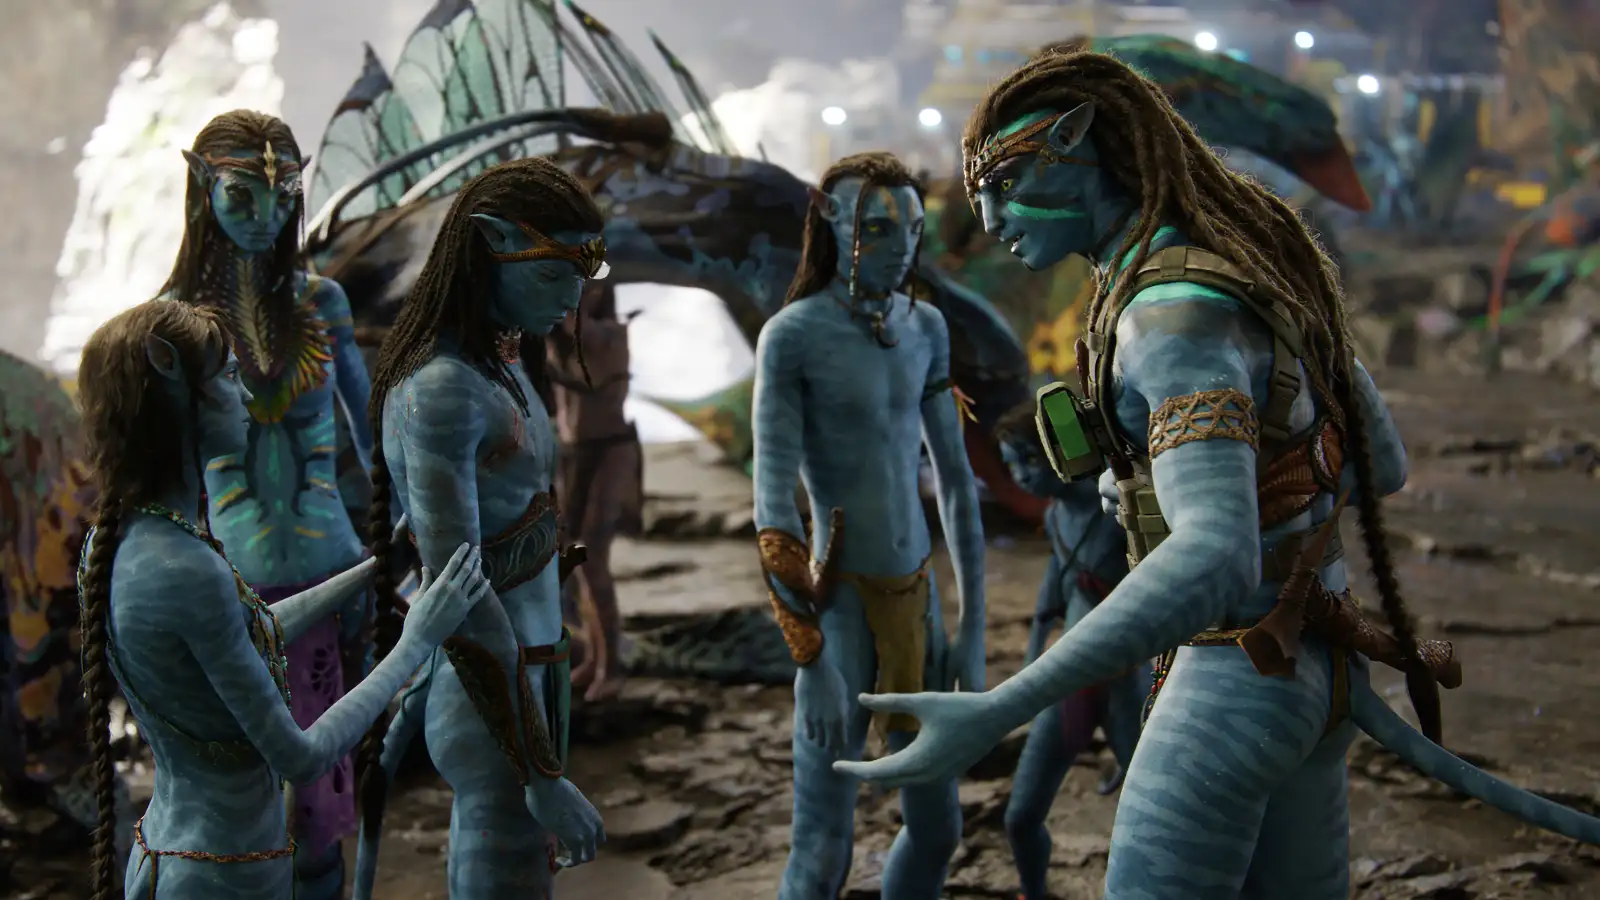 Avatar: The Way of Water Early Reviews: 'Technology Master' James Cameron's  'TOO OVERWHELMING' visuals praised | PINKVILLA